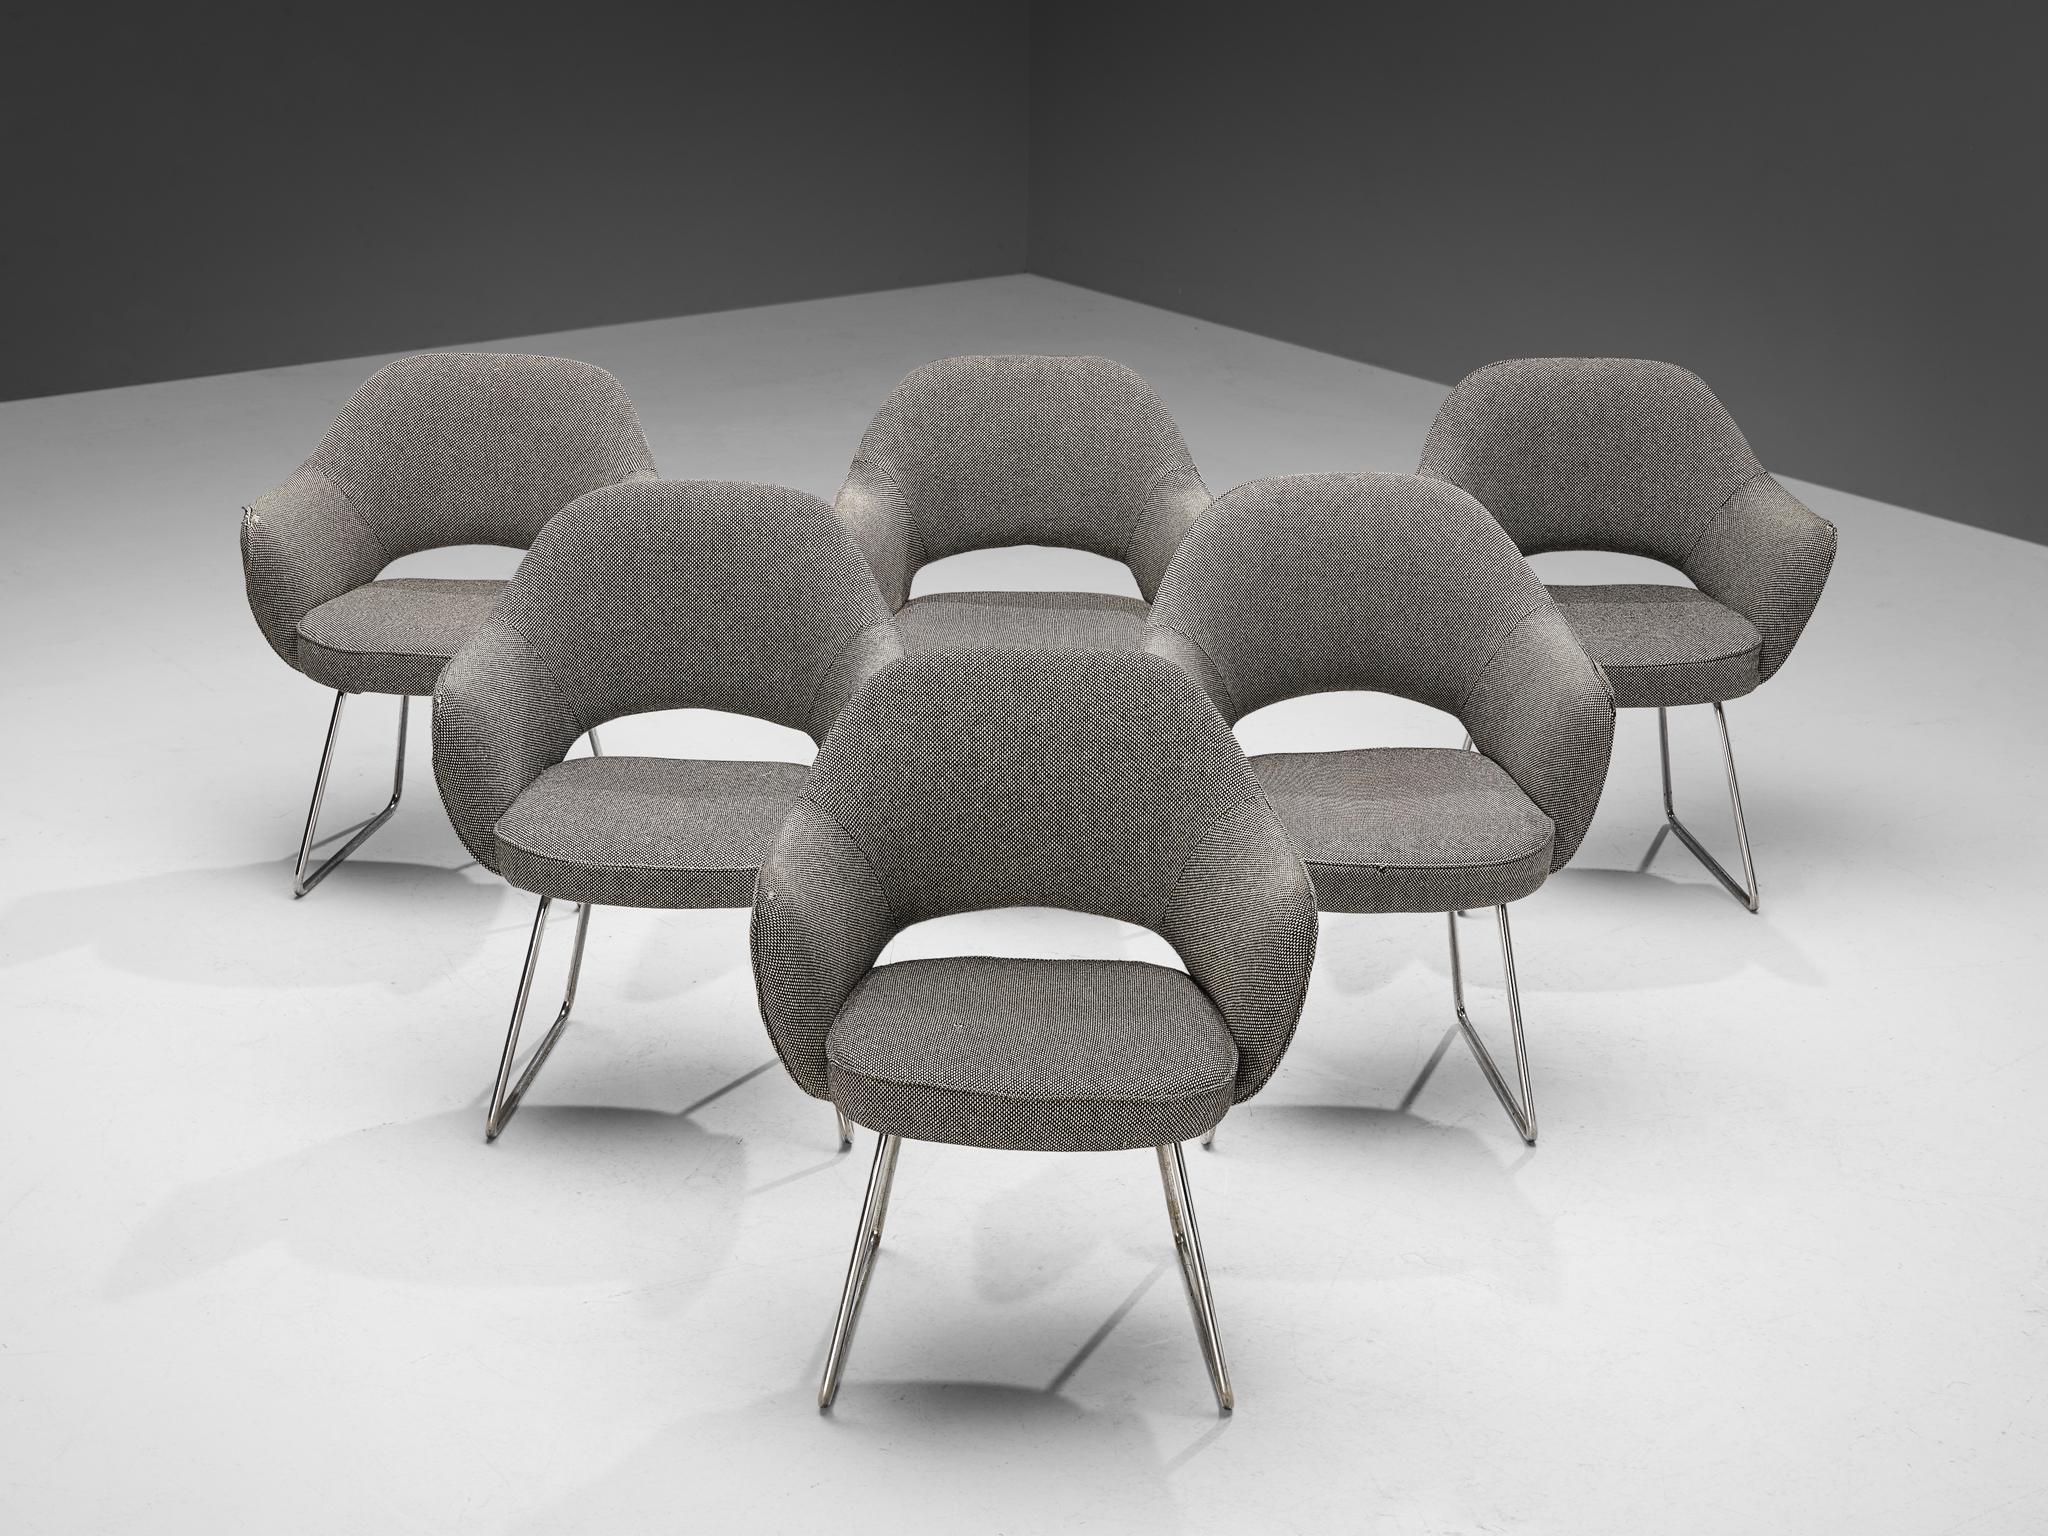 Eero Saarinen for Knoll International, set of ‘Conference’ armchairs, original fabric, chromed metal, France, Paris, designed in 1957

This set of six armchairs were commissioned by the UNESCO Headquarters located in Paris. This iconic building was